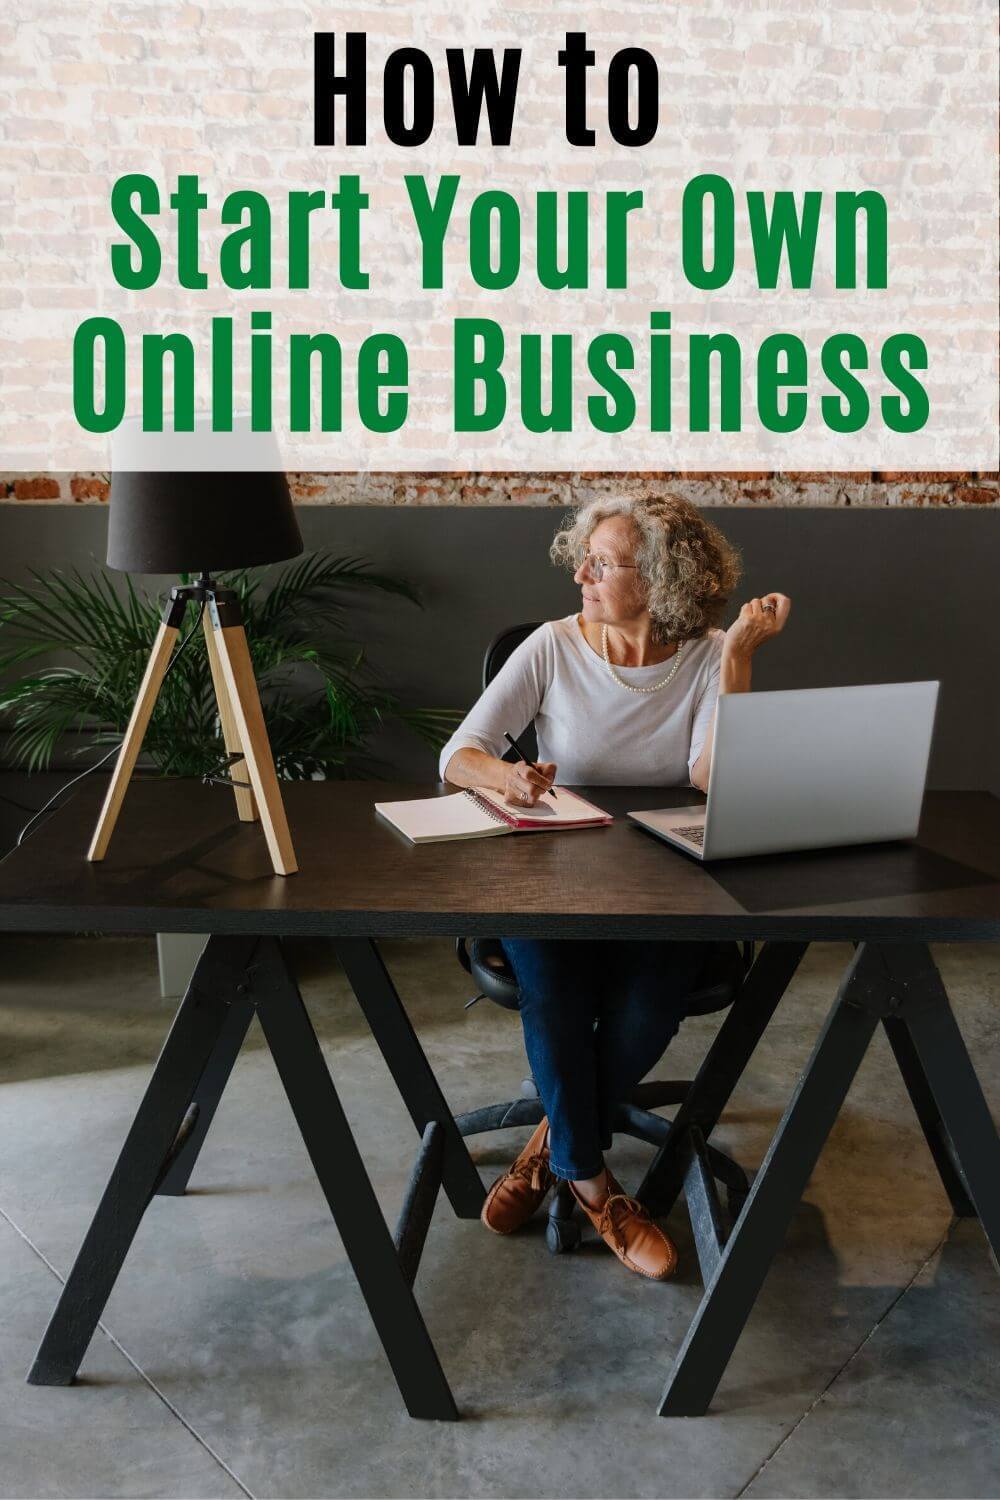 Hot to Start Your Onw Online Business